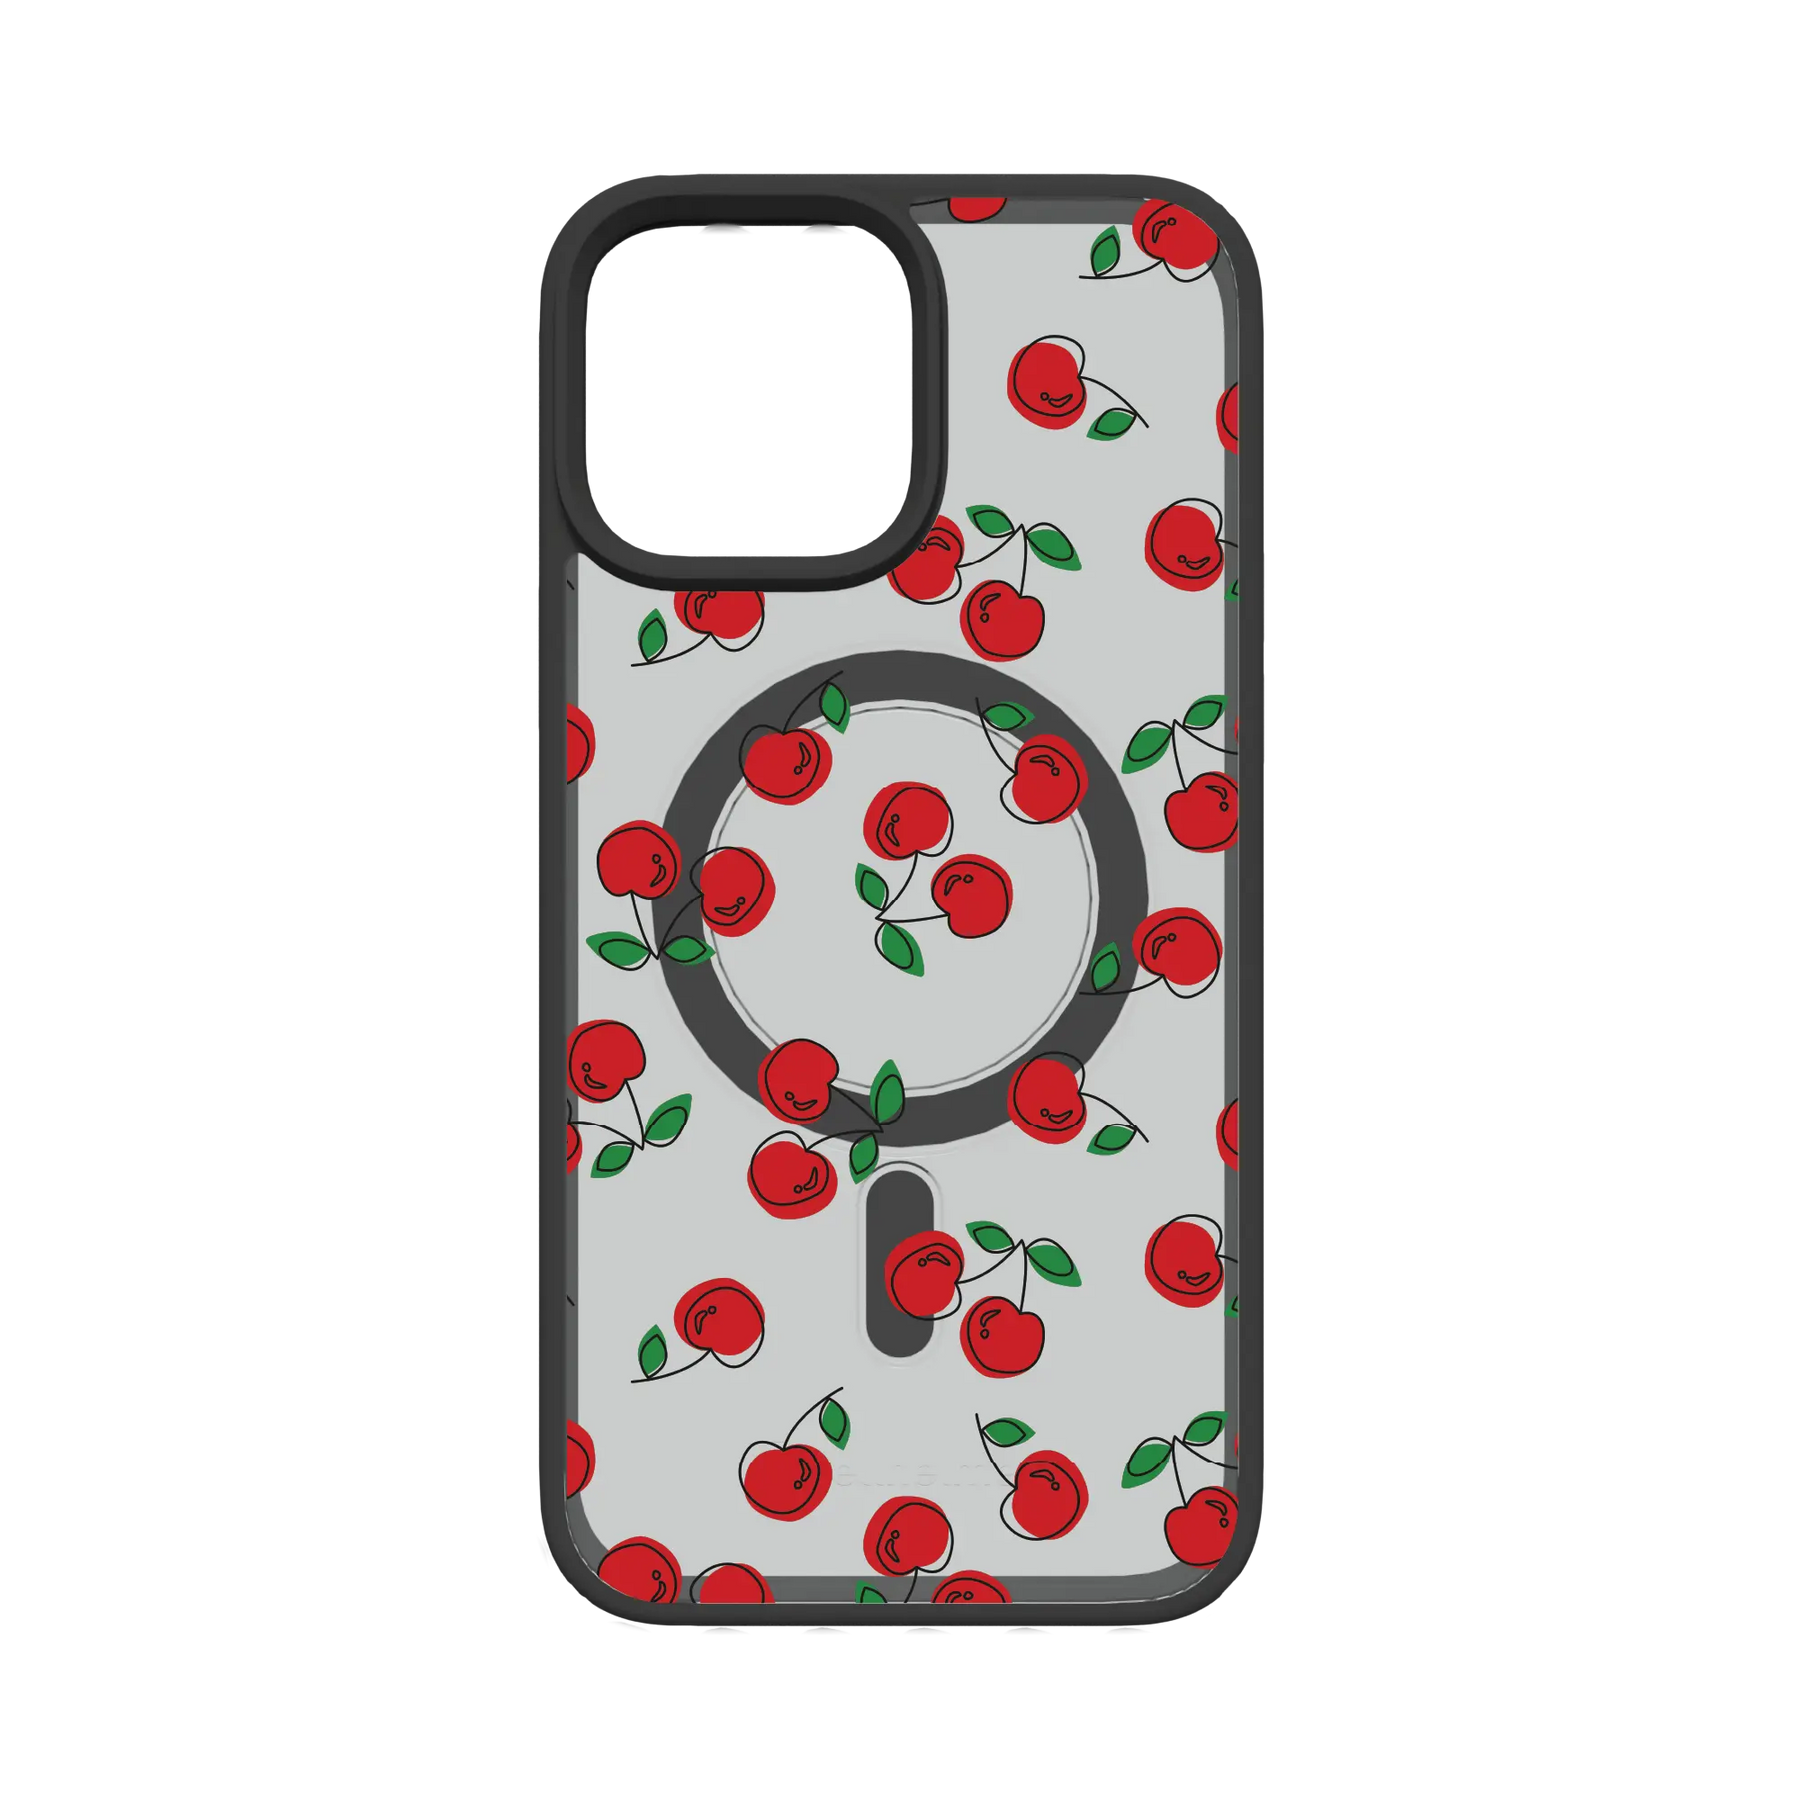 Apple-iPhone-13-Pro-Max-Crystal-Clear Bowl O' Cherries | Custom MagSafe Red Cherry Case for Apple iPhone 13 Series cellhelmet cellhelmet